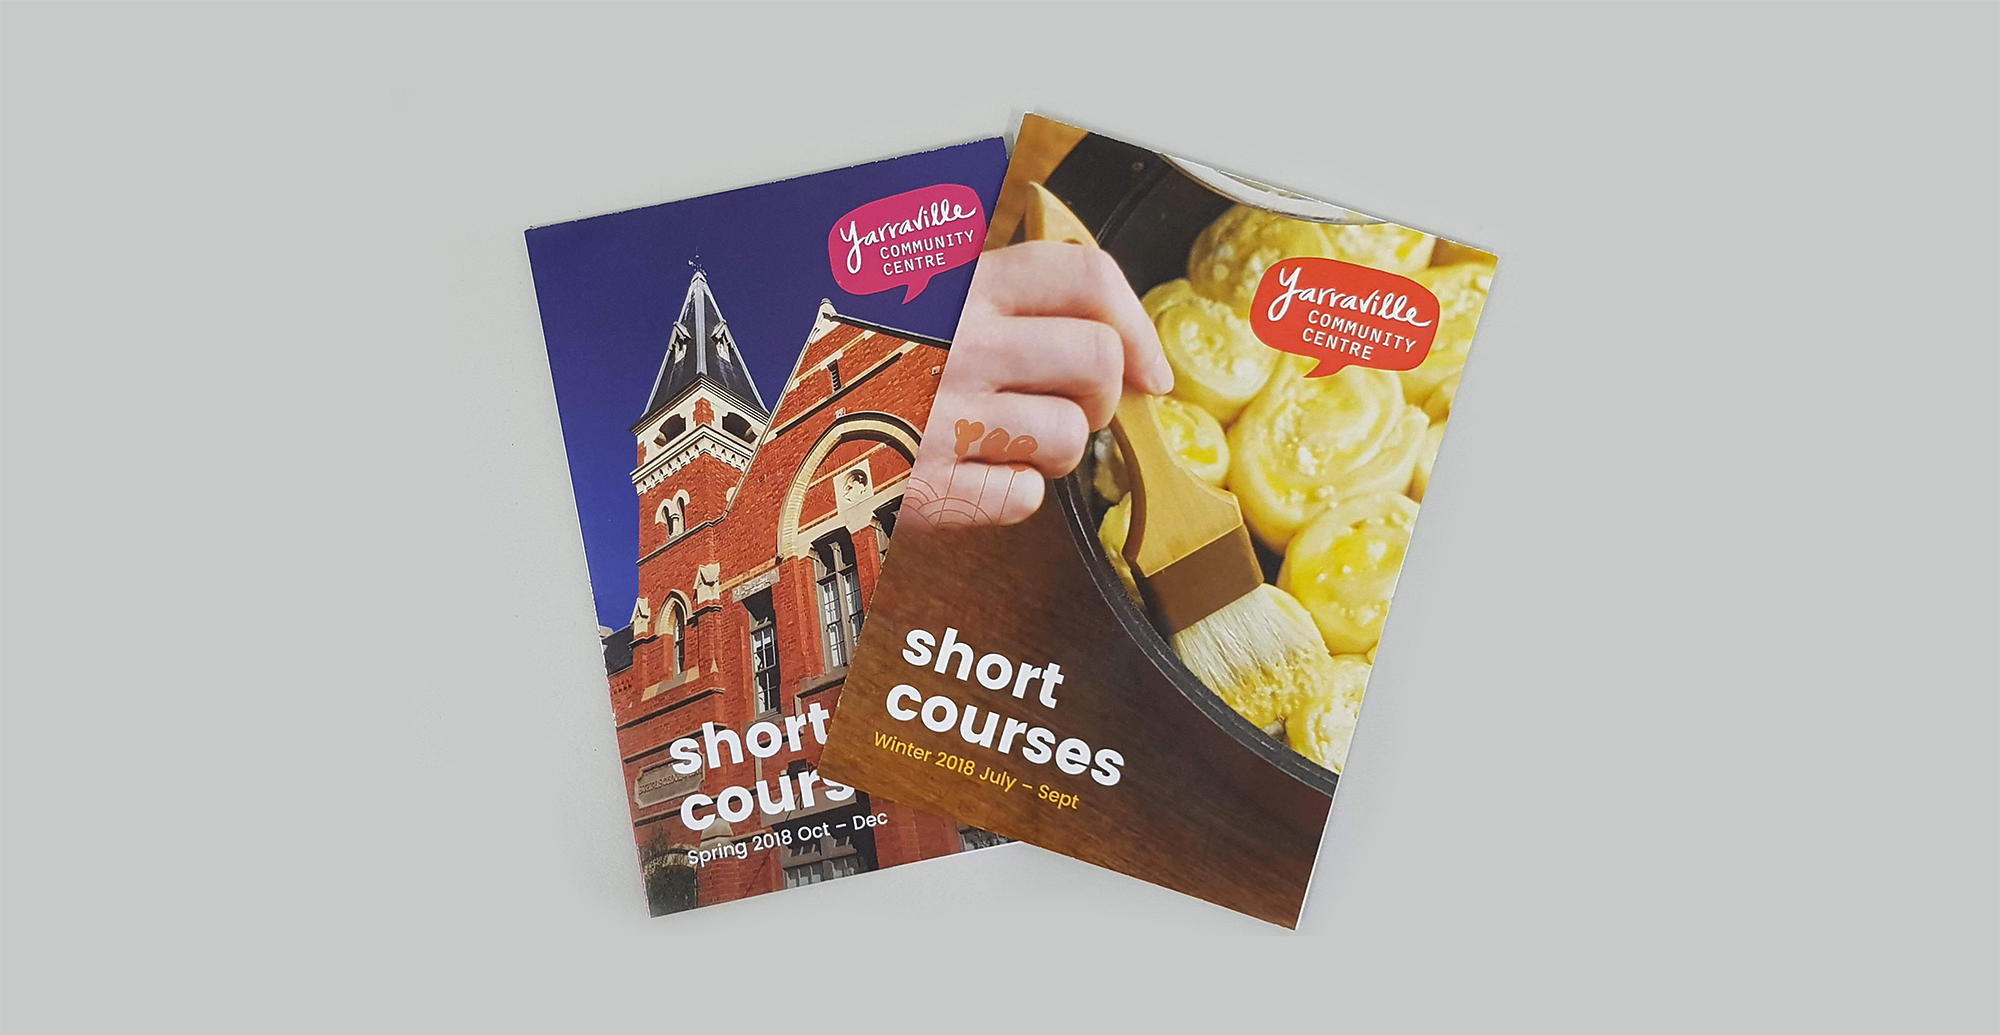 Full colour mock up of two YCC short courses brochures from 2018 - covers only